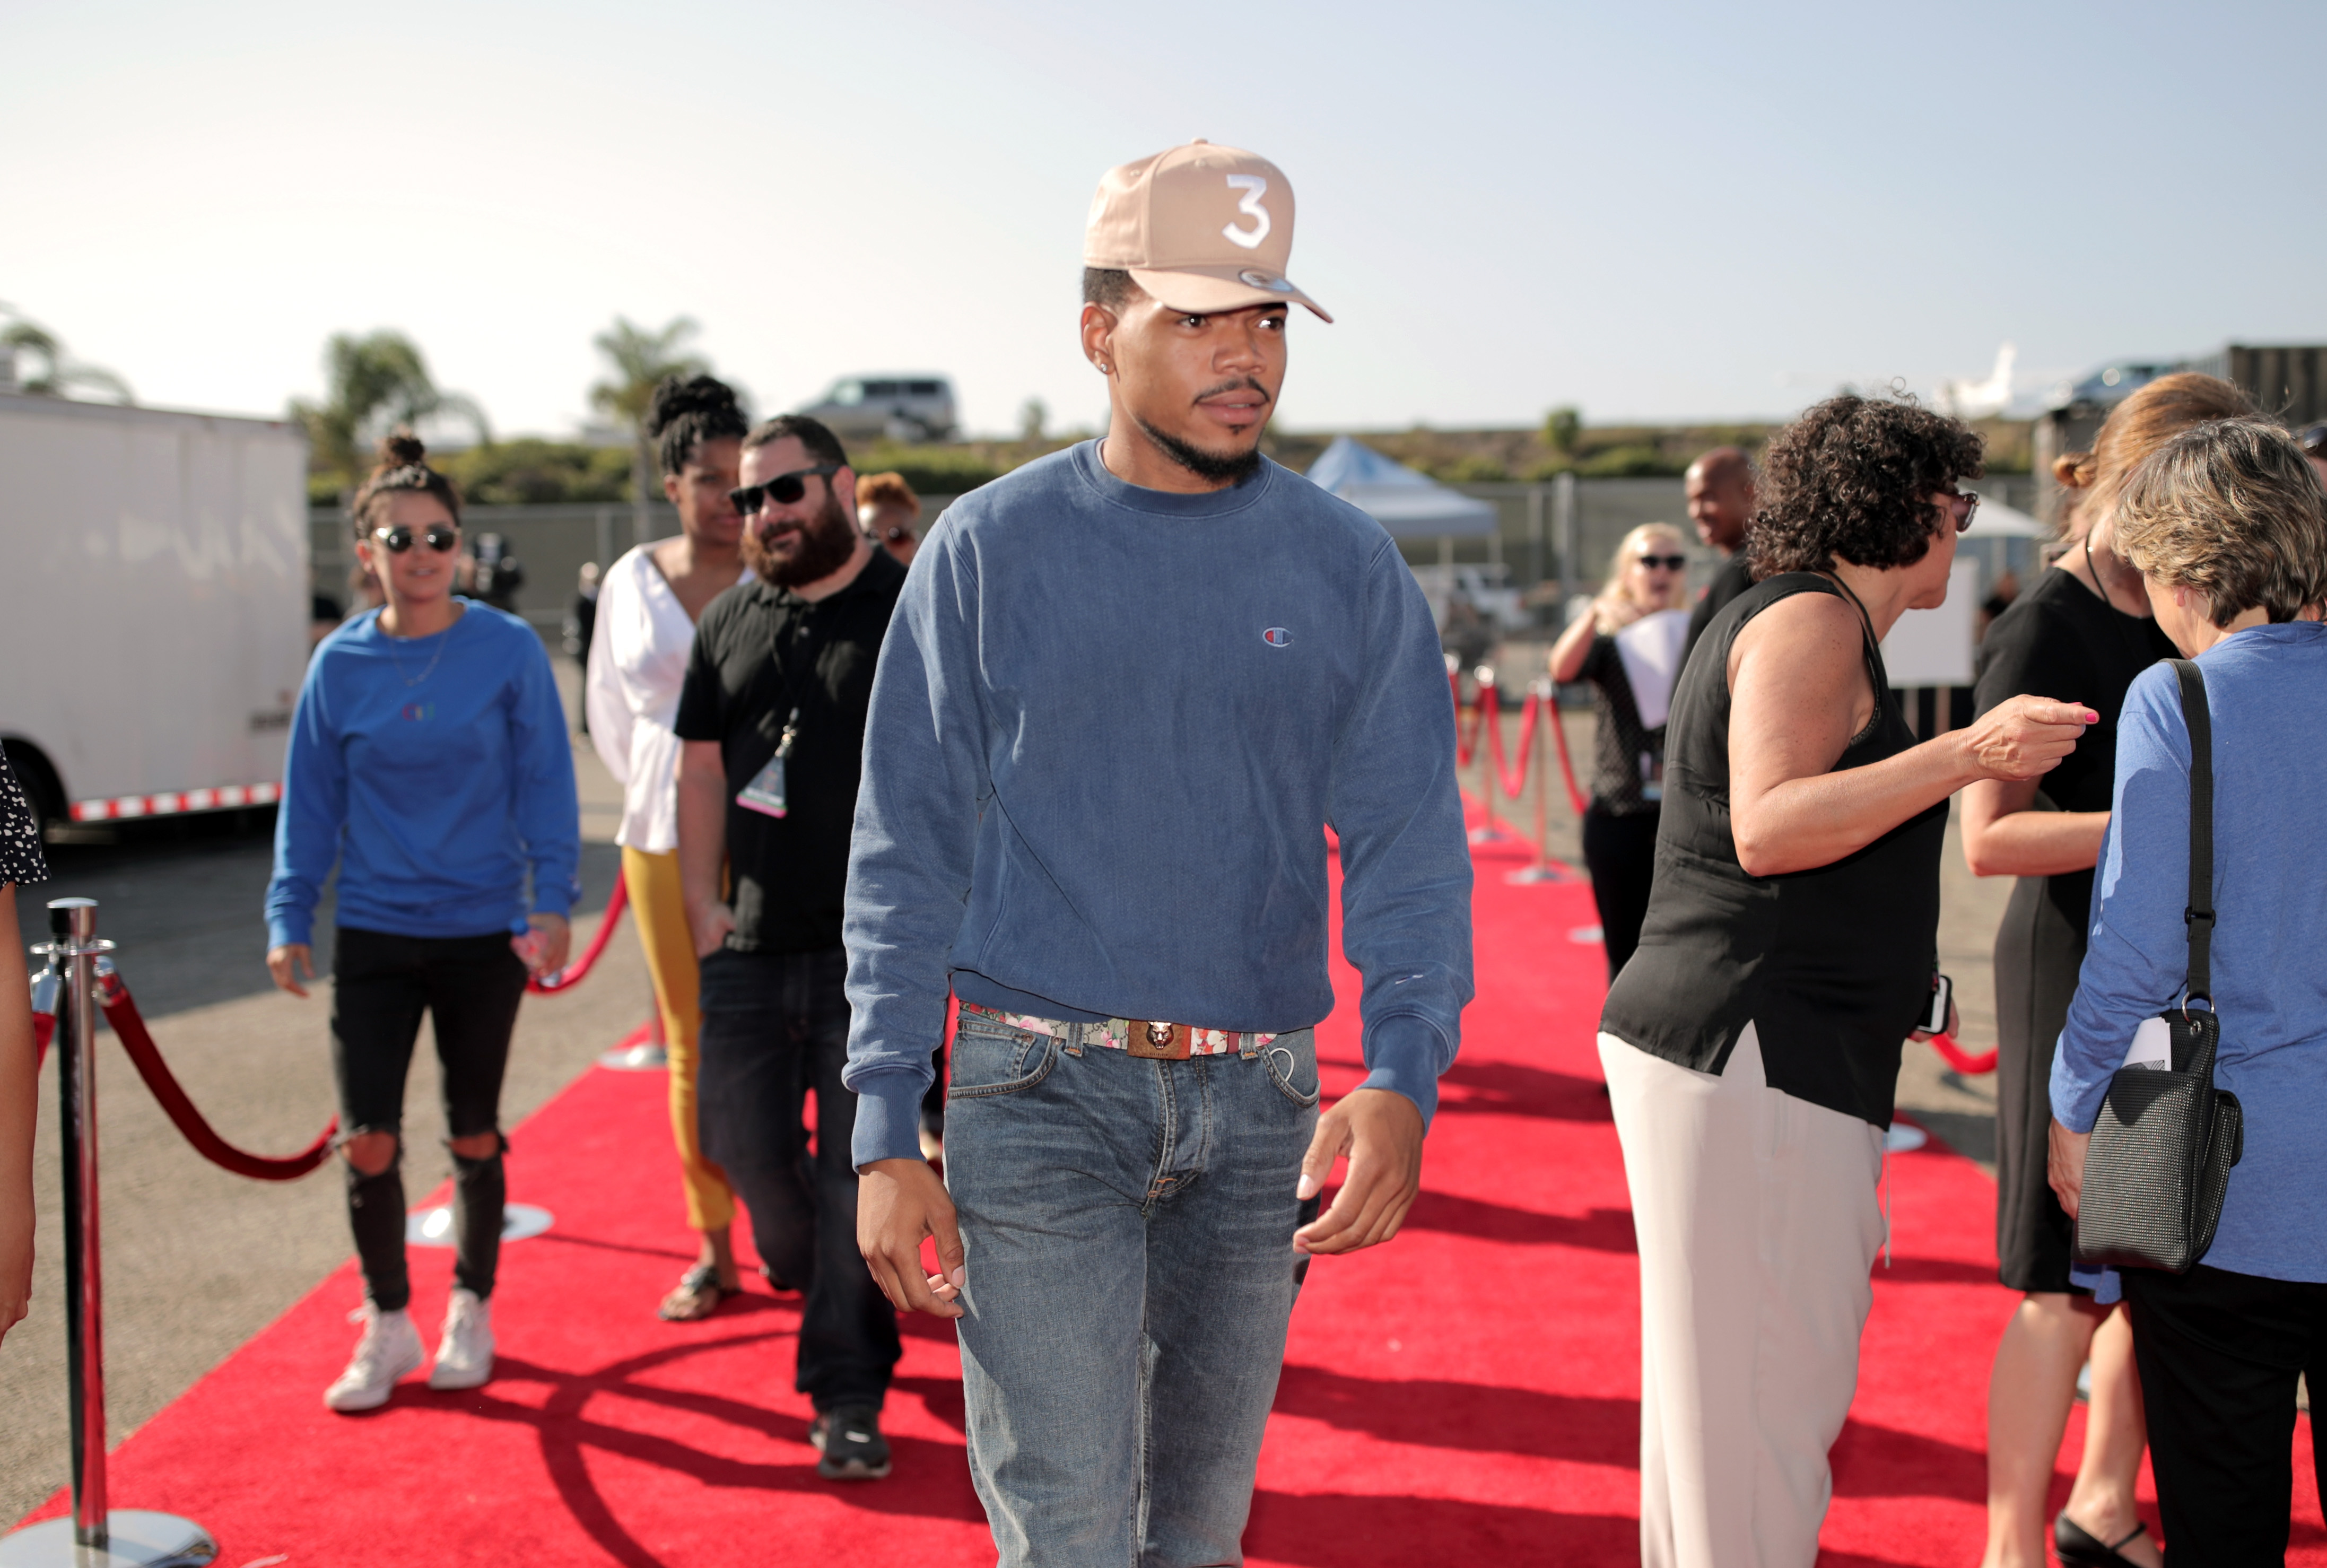 Chance The Rapper Will Star In Upcoming Horror Movie “Slice”